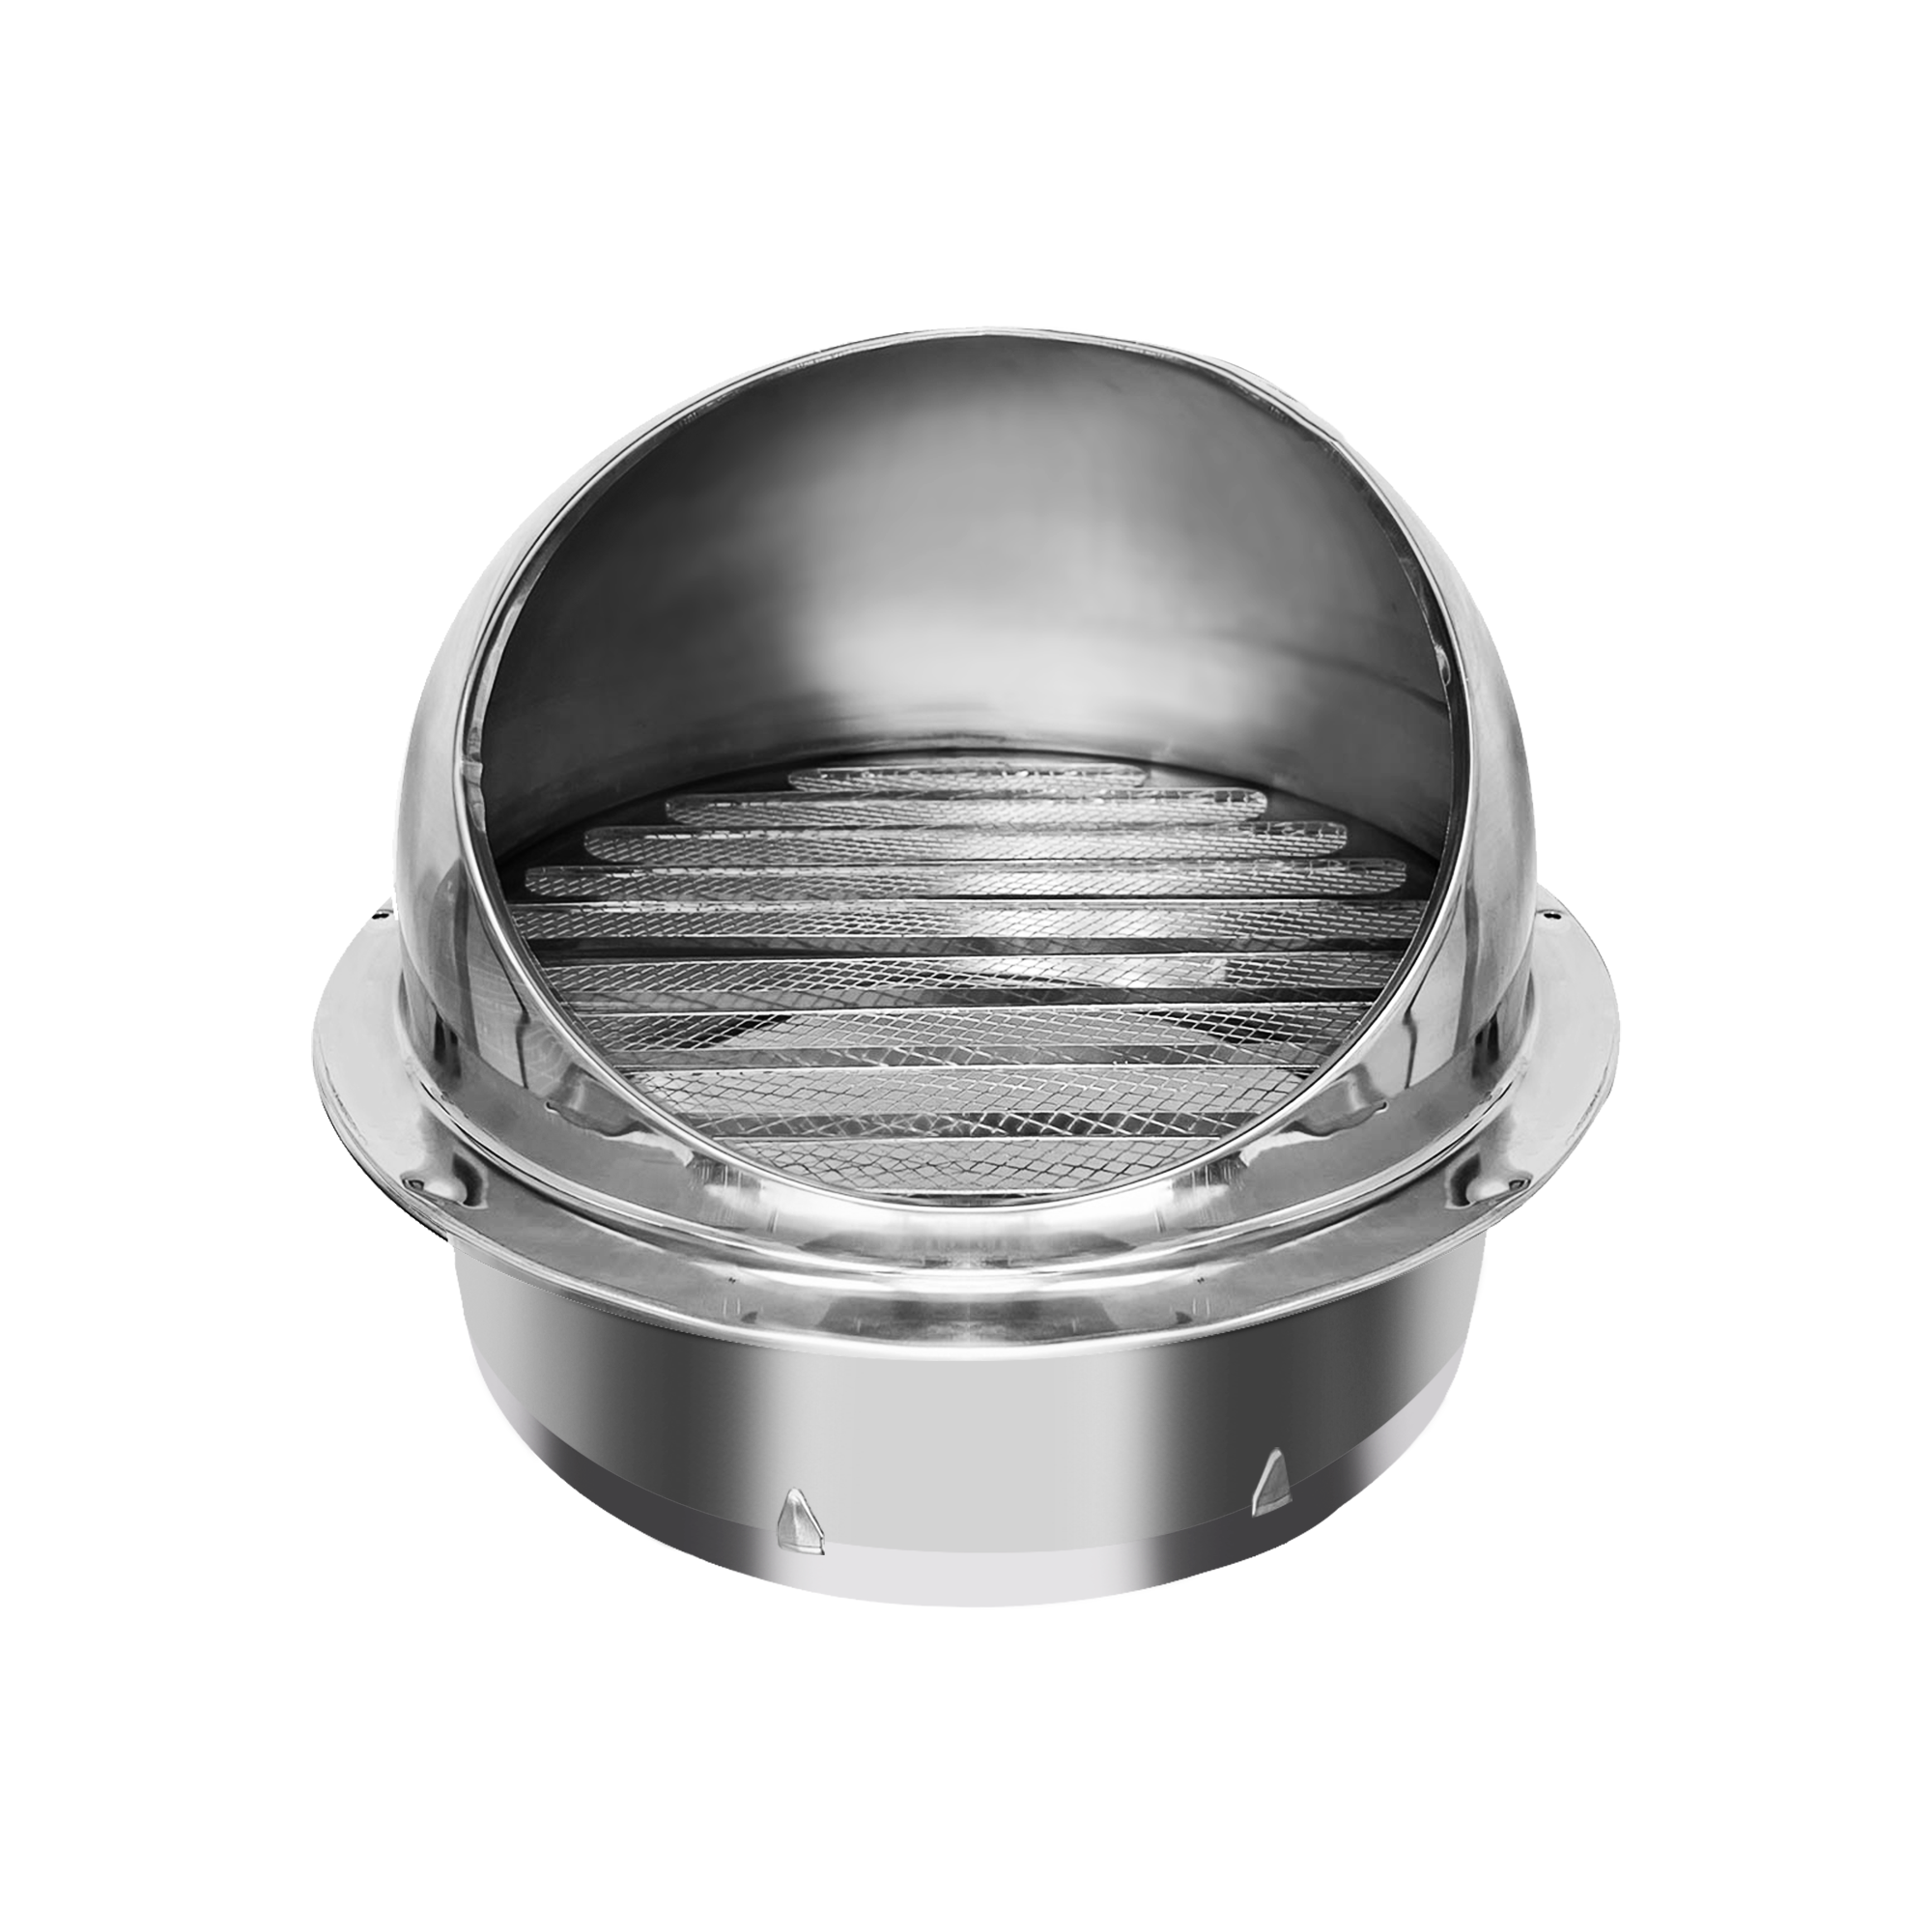 4/6/8/10 Inch Dryer Vent Cover Stainless Steel Round Exhaust Grill Ventilation Outlet Wall Air Vent